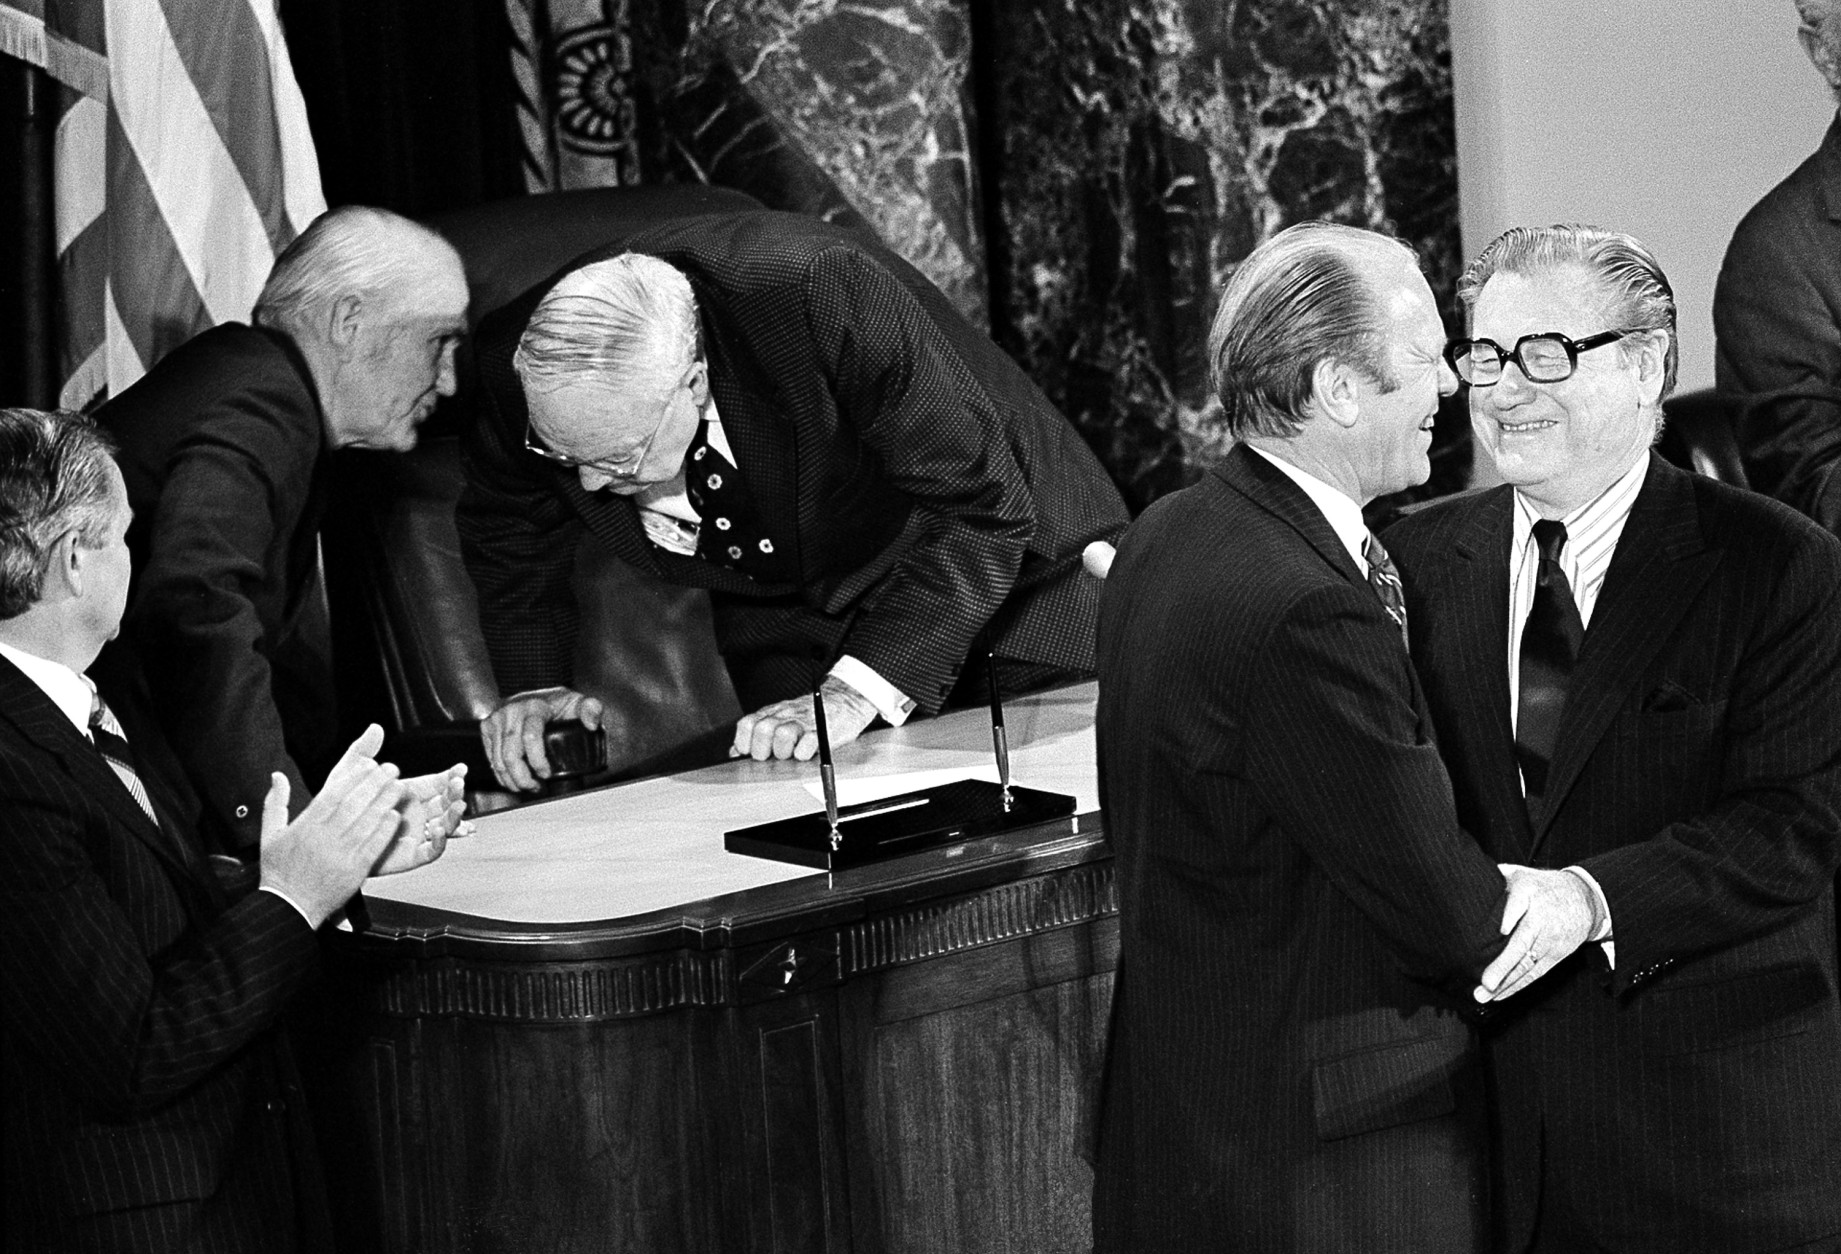 U.S. President Gerald Ford congratulates Vice President Nelson A. Rockefeller, right, after he was sworn-in on the floor of the Senate in Washington, D.C., Thursday night, Dec. 19, 1974.  Rockefeller is the 41st vice president of the United States.  (AP Photo)